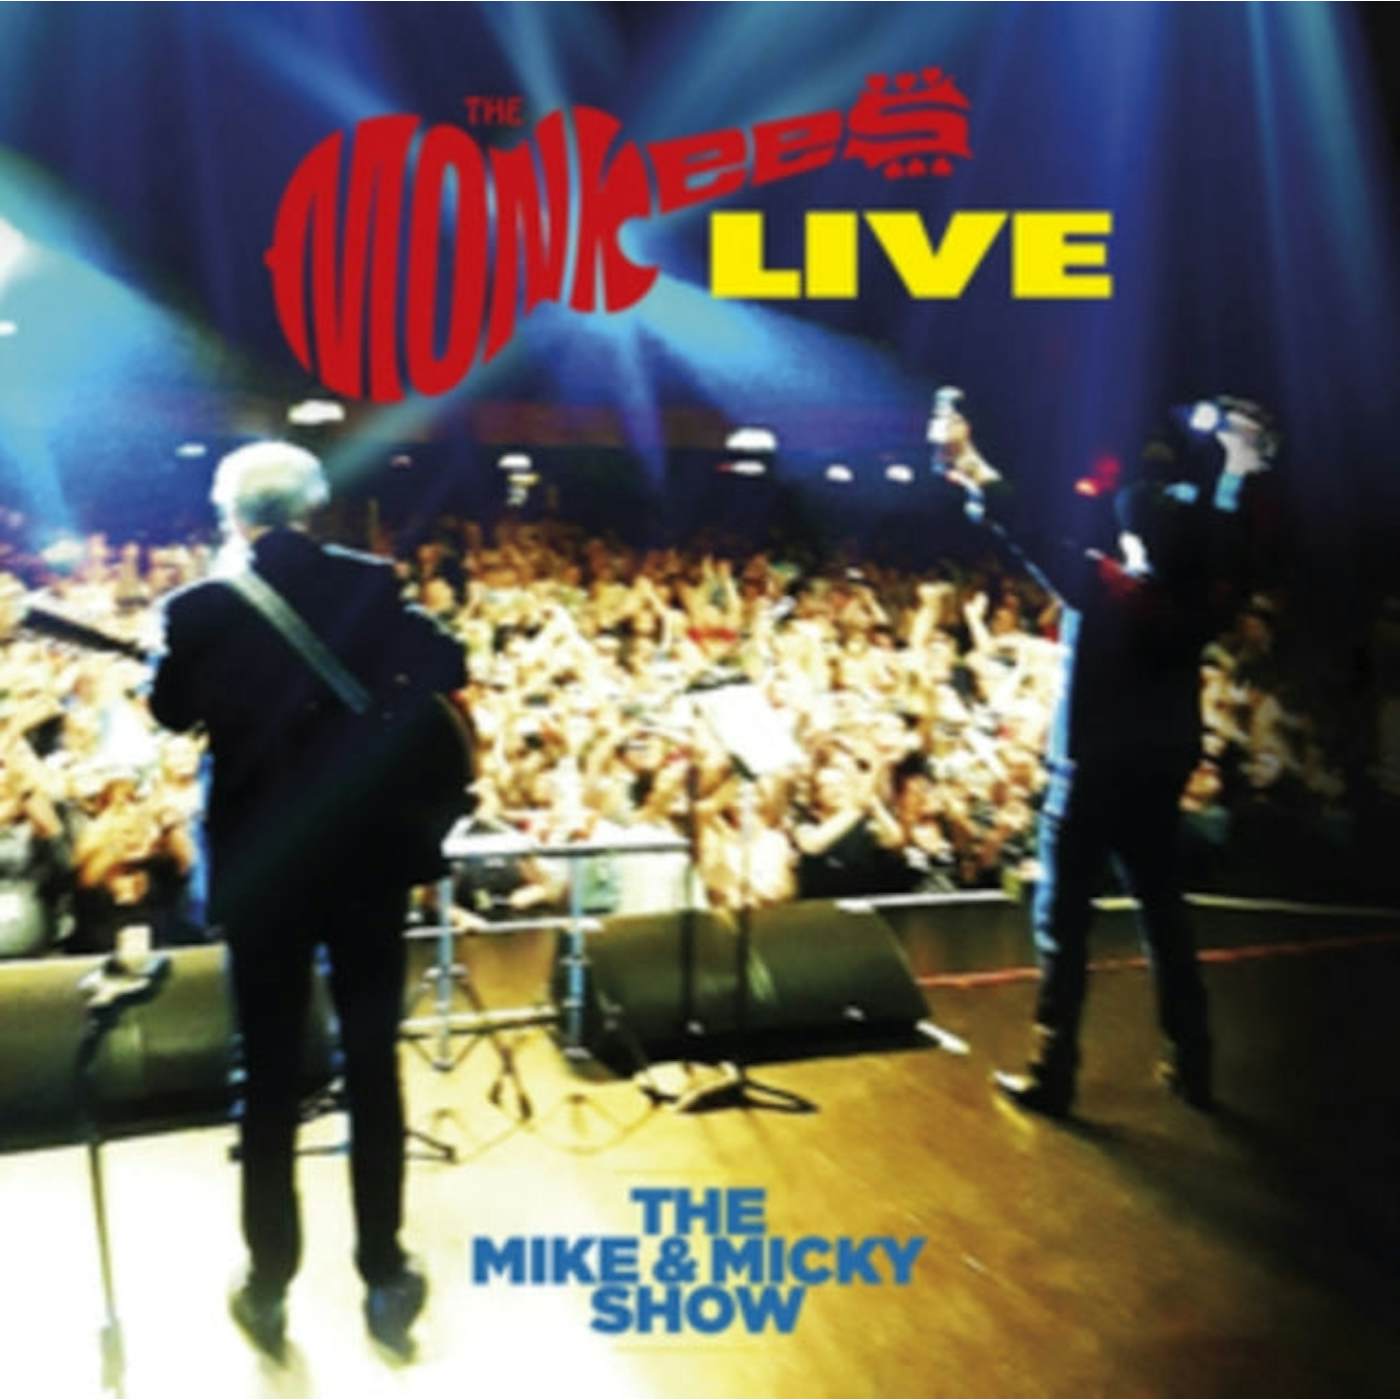 The Monkees LP - The Mike And Micky Show Live (Vinyl)